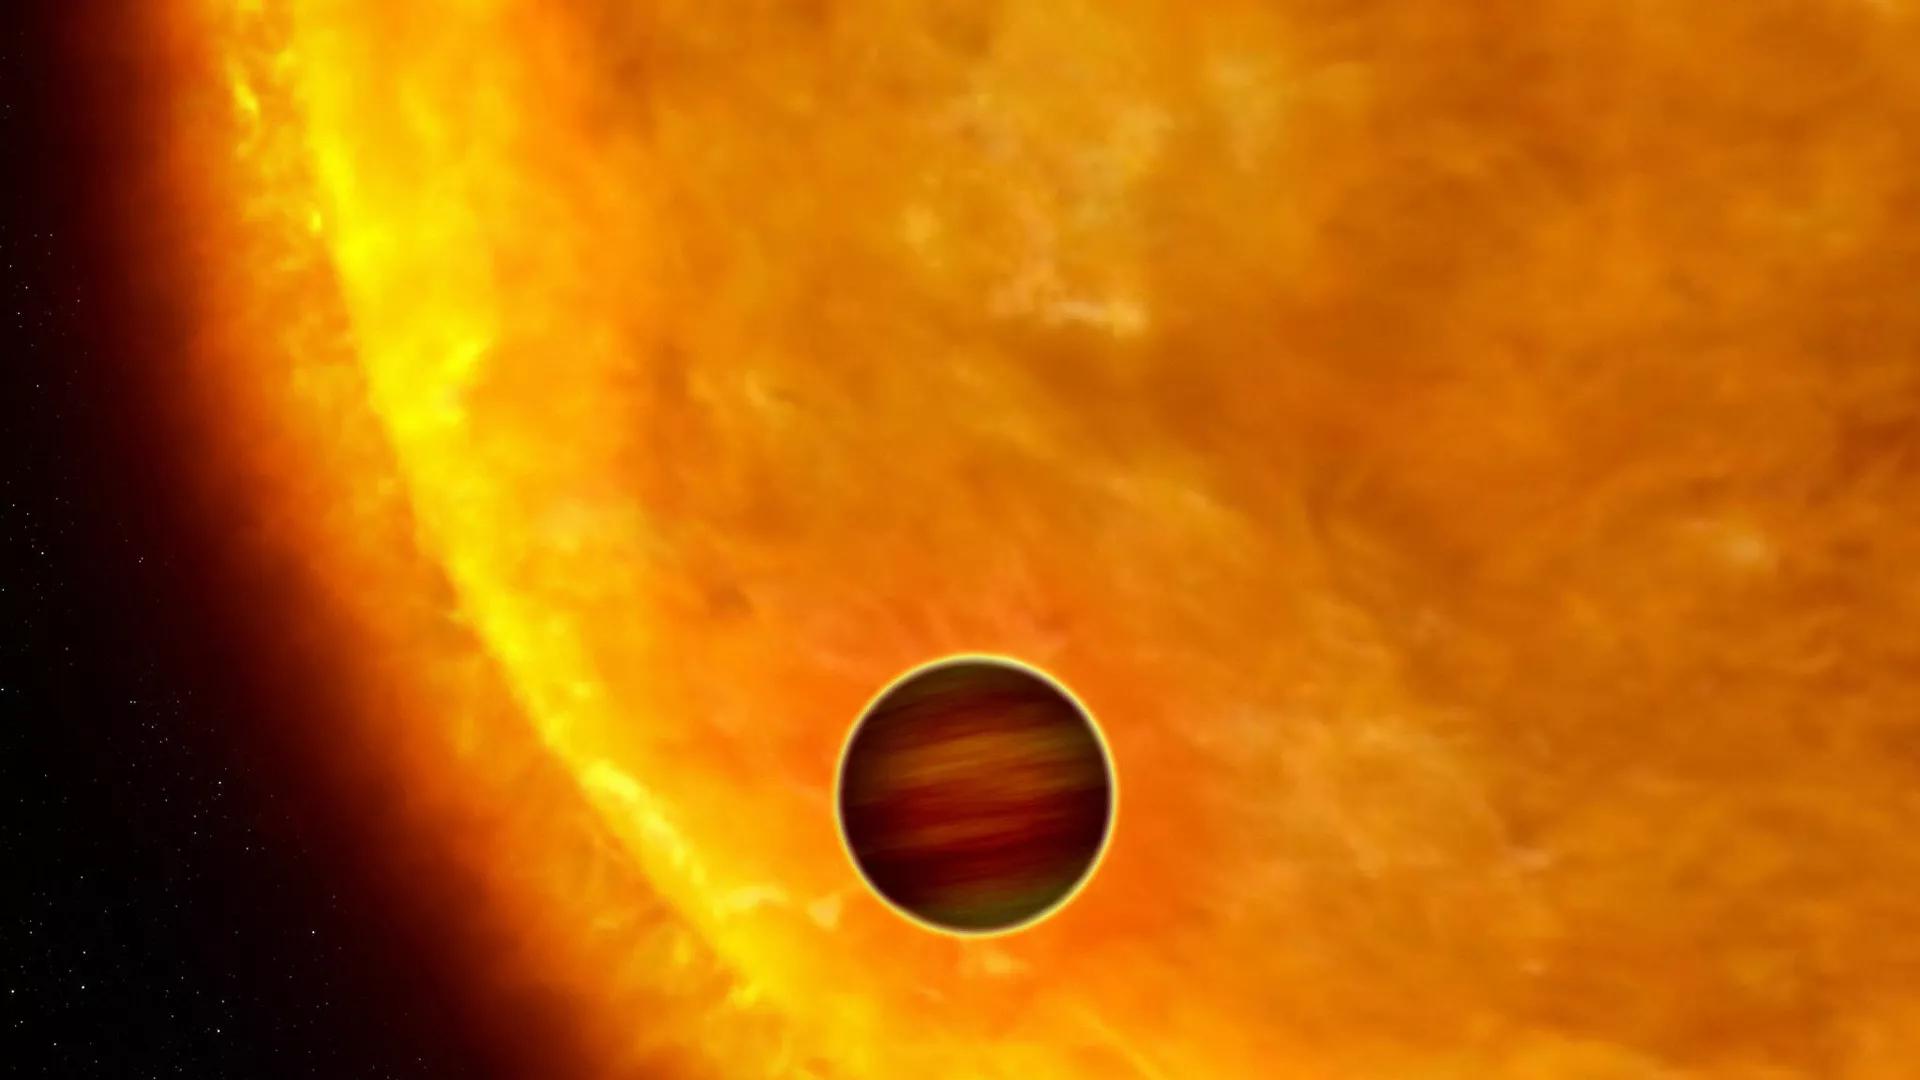 Amateur Astronomer Discovers Jupiter-Like Planet With Same Mass as the Sun, NASA Says